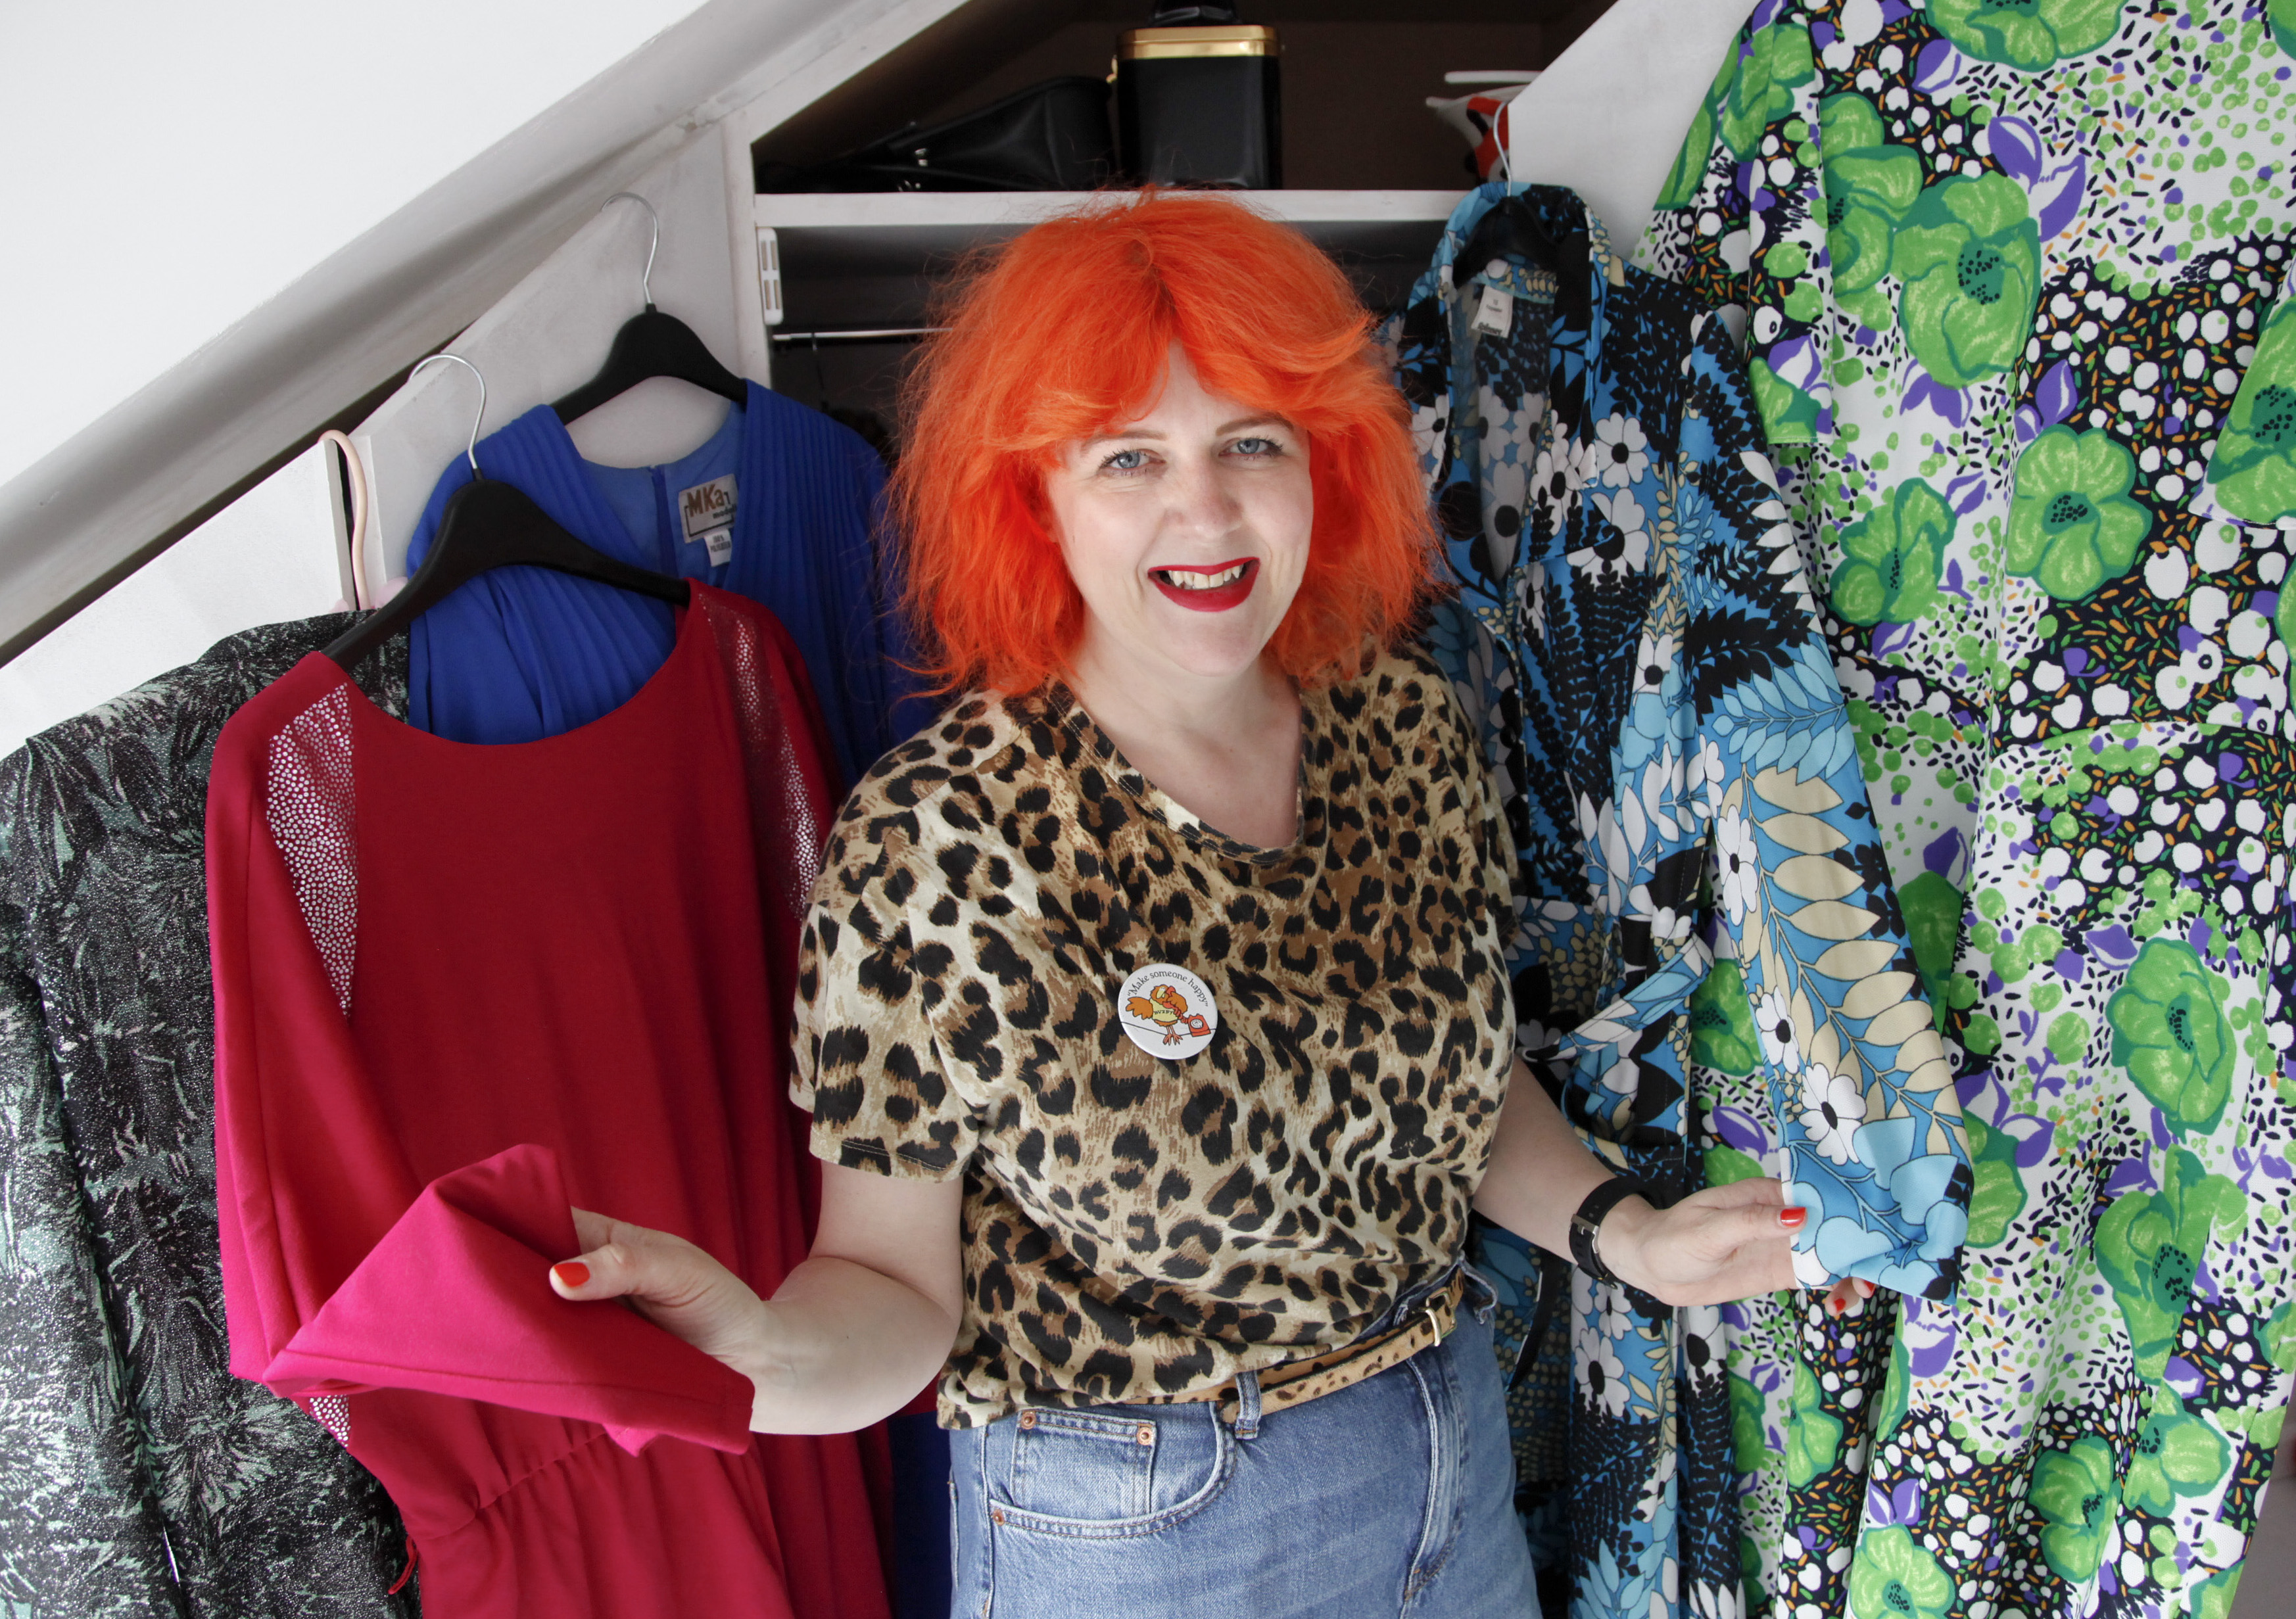 Self-confessed lifelong hoarder Merle Brown’s wardrobe is bulging with outfits she simply can’t bear to throw away